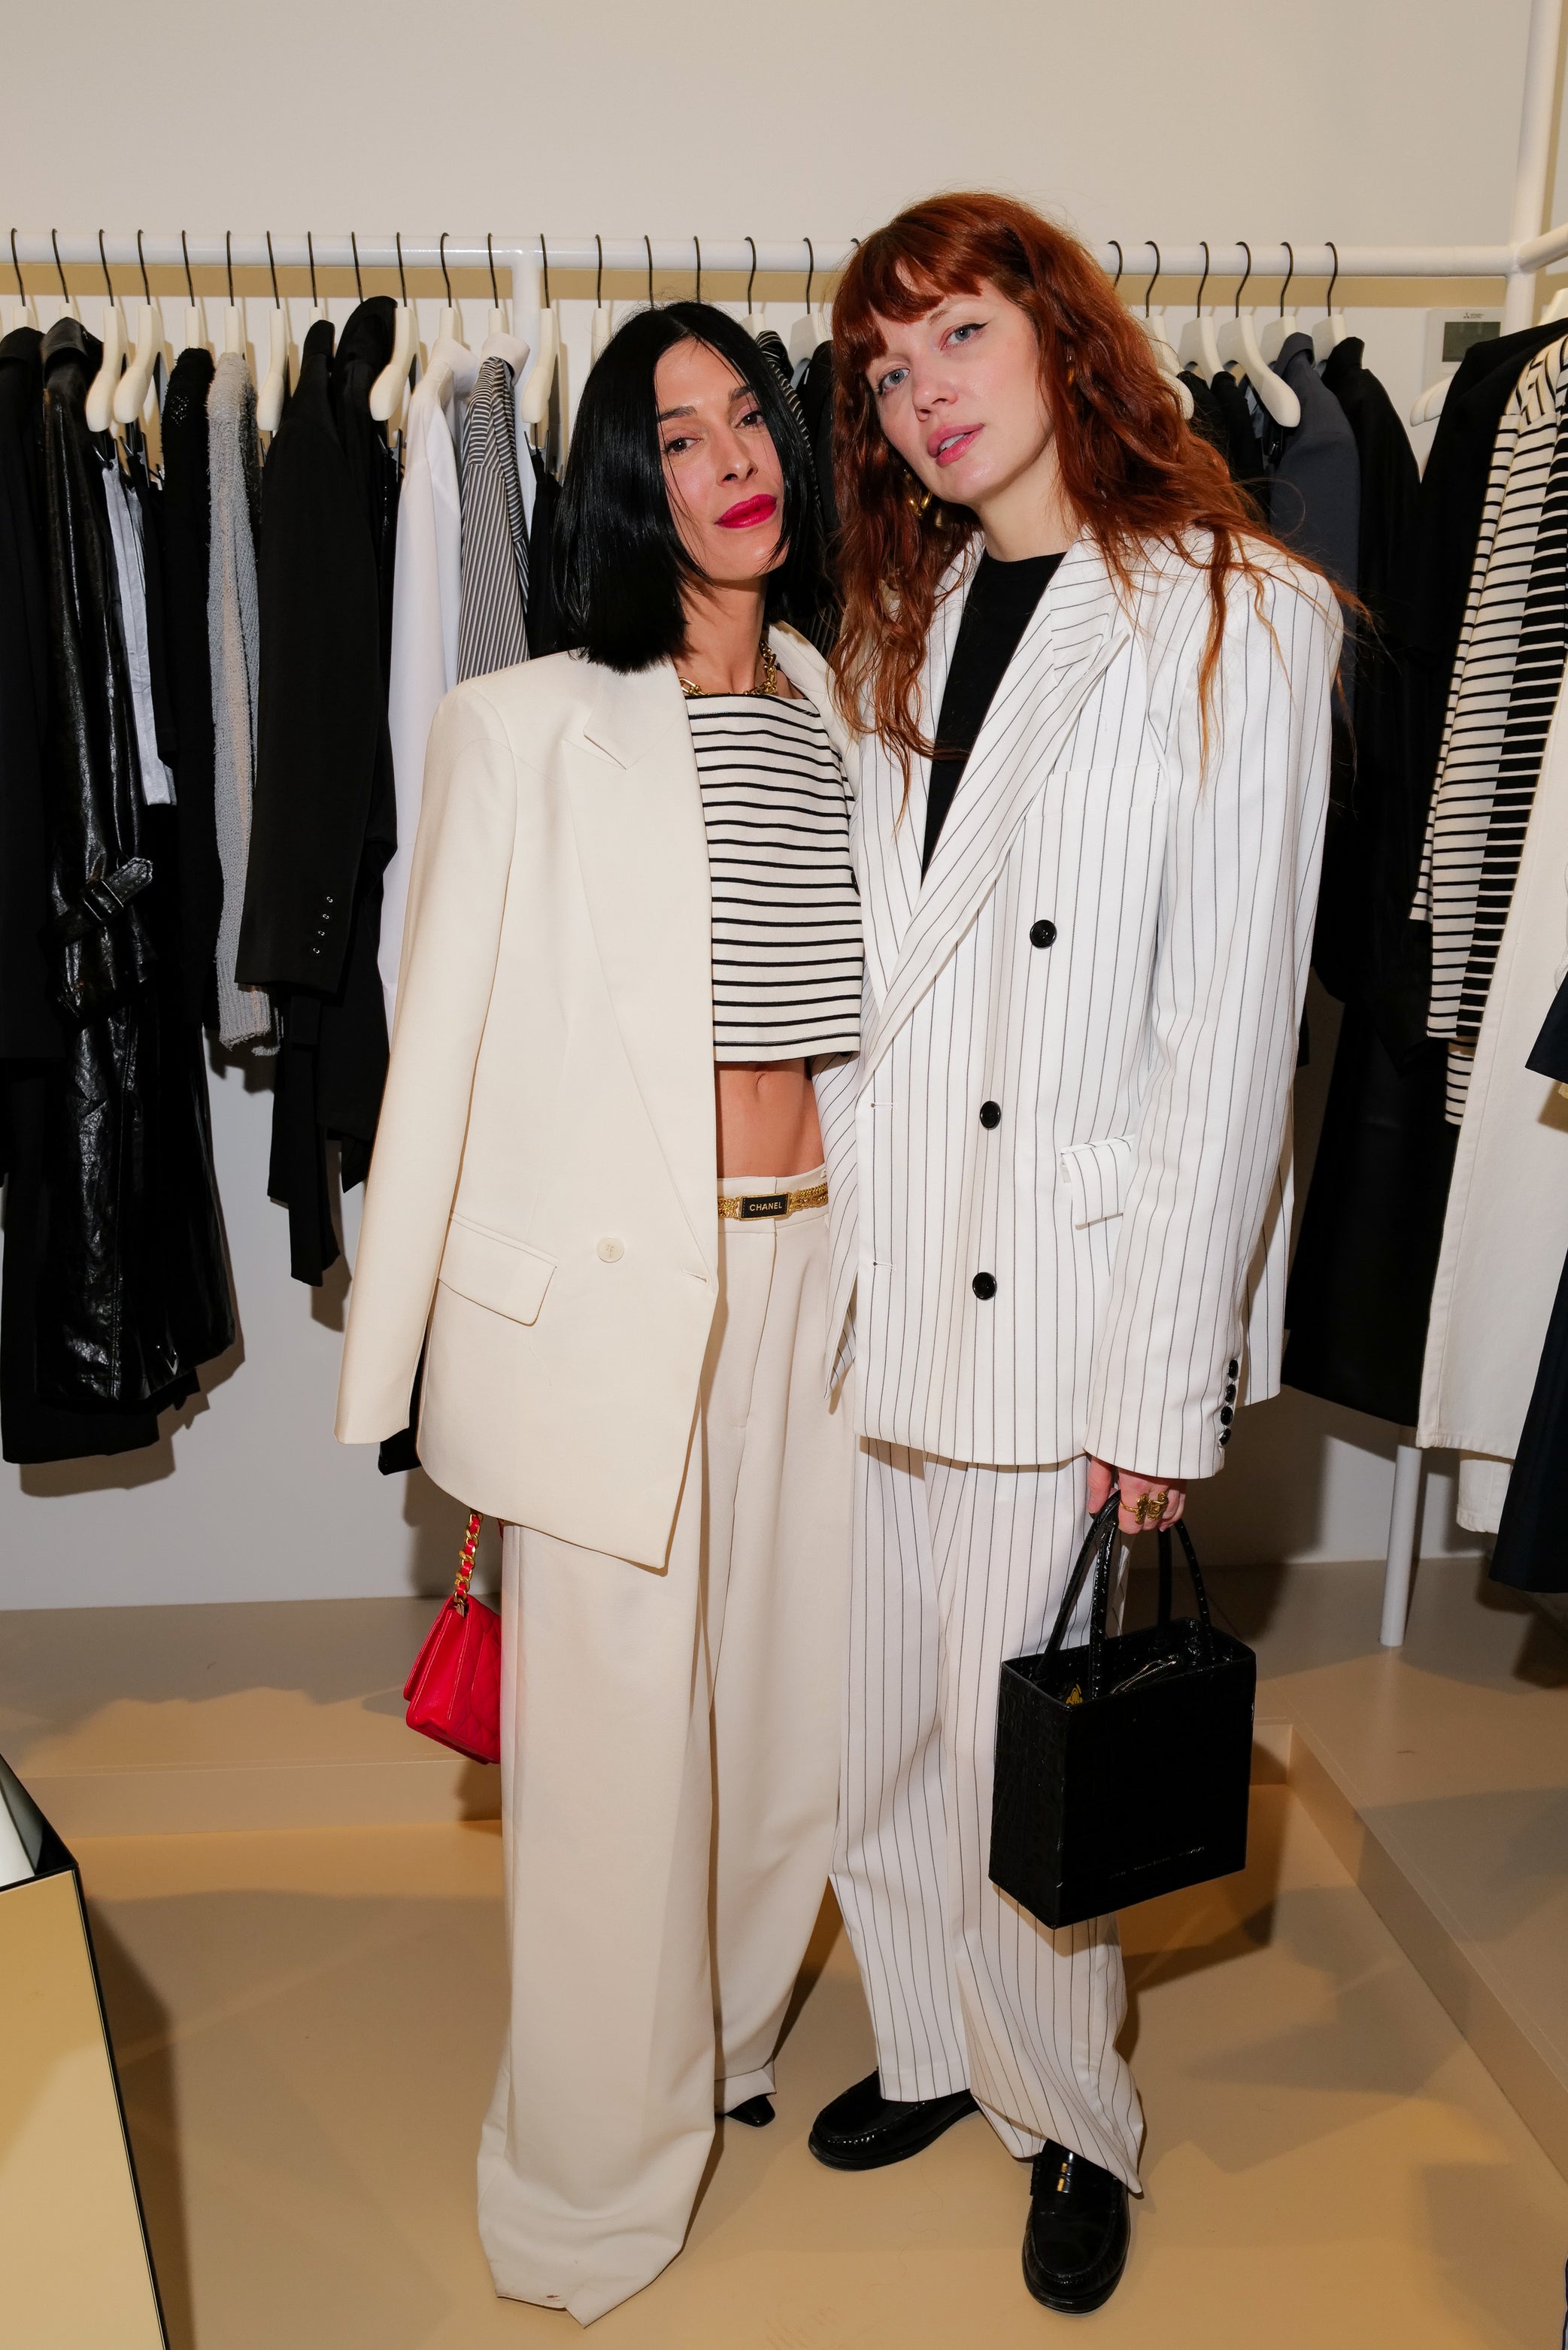 Athena Calderone and Brianna Lance at the opening of the Frankie Shop New York store.